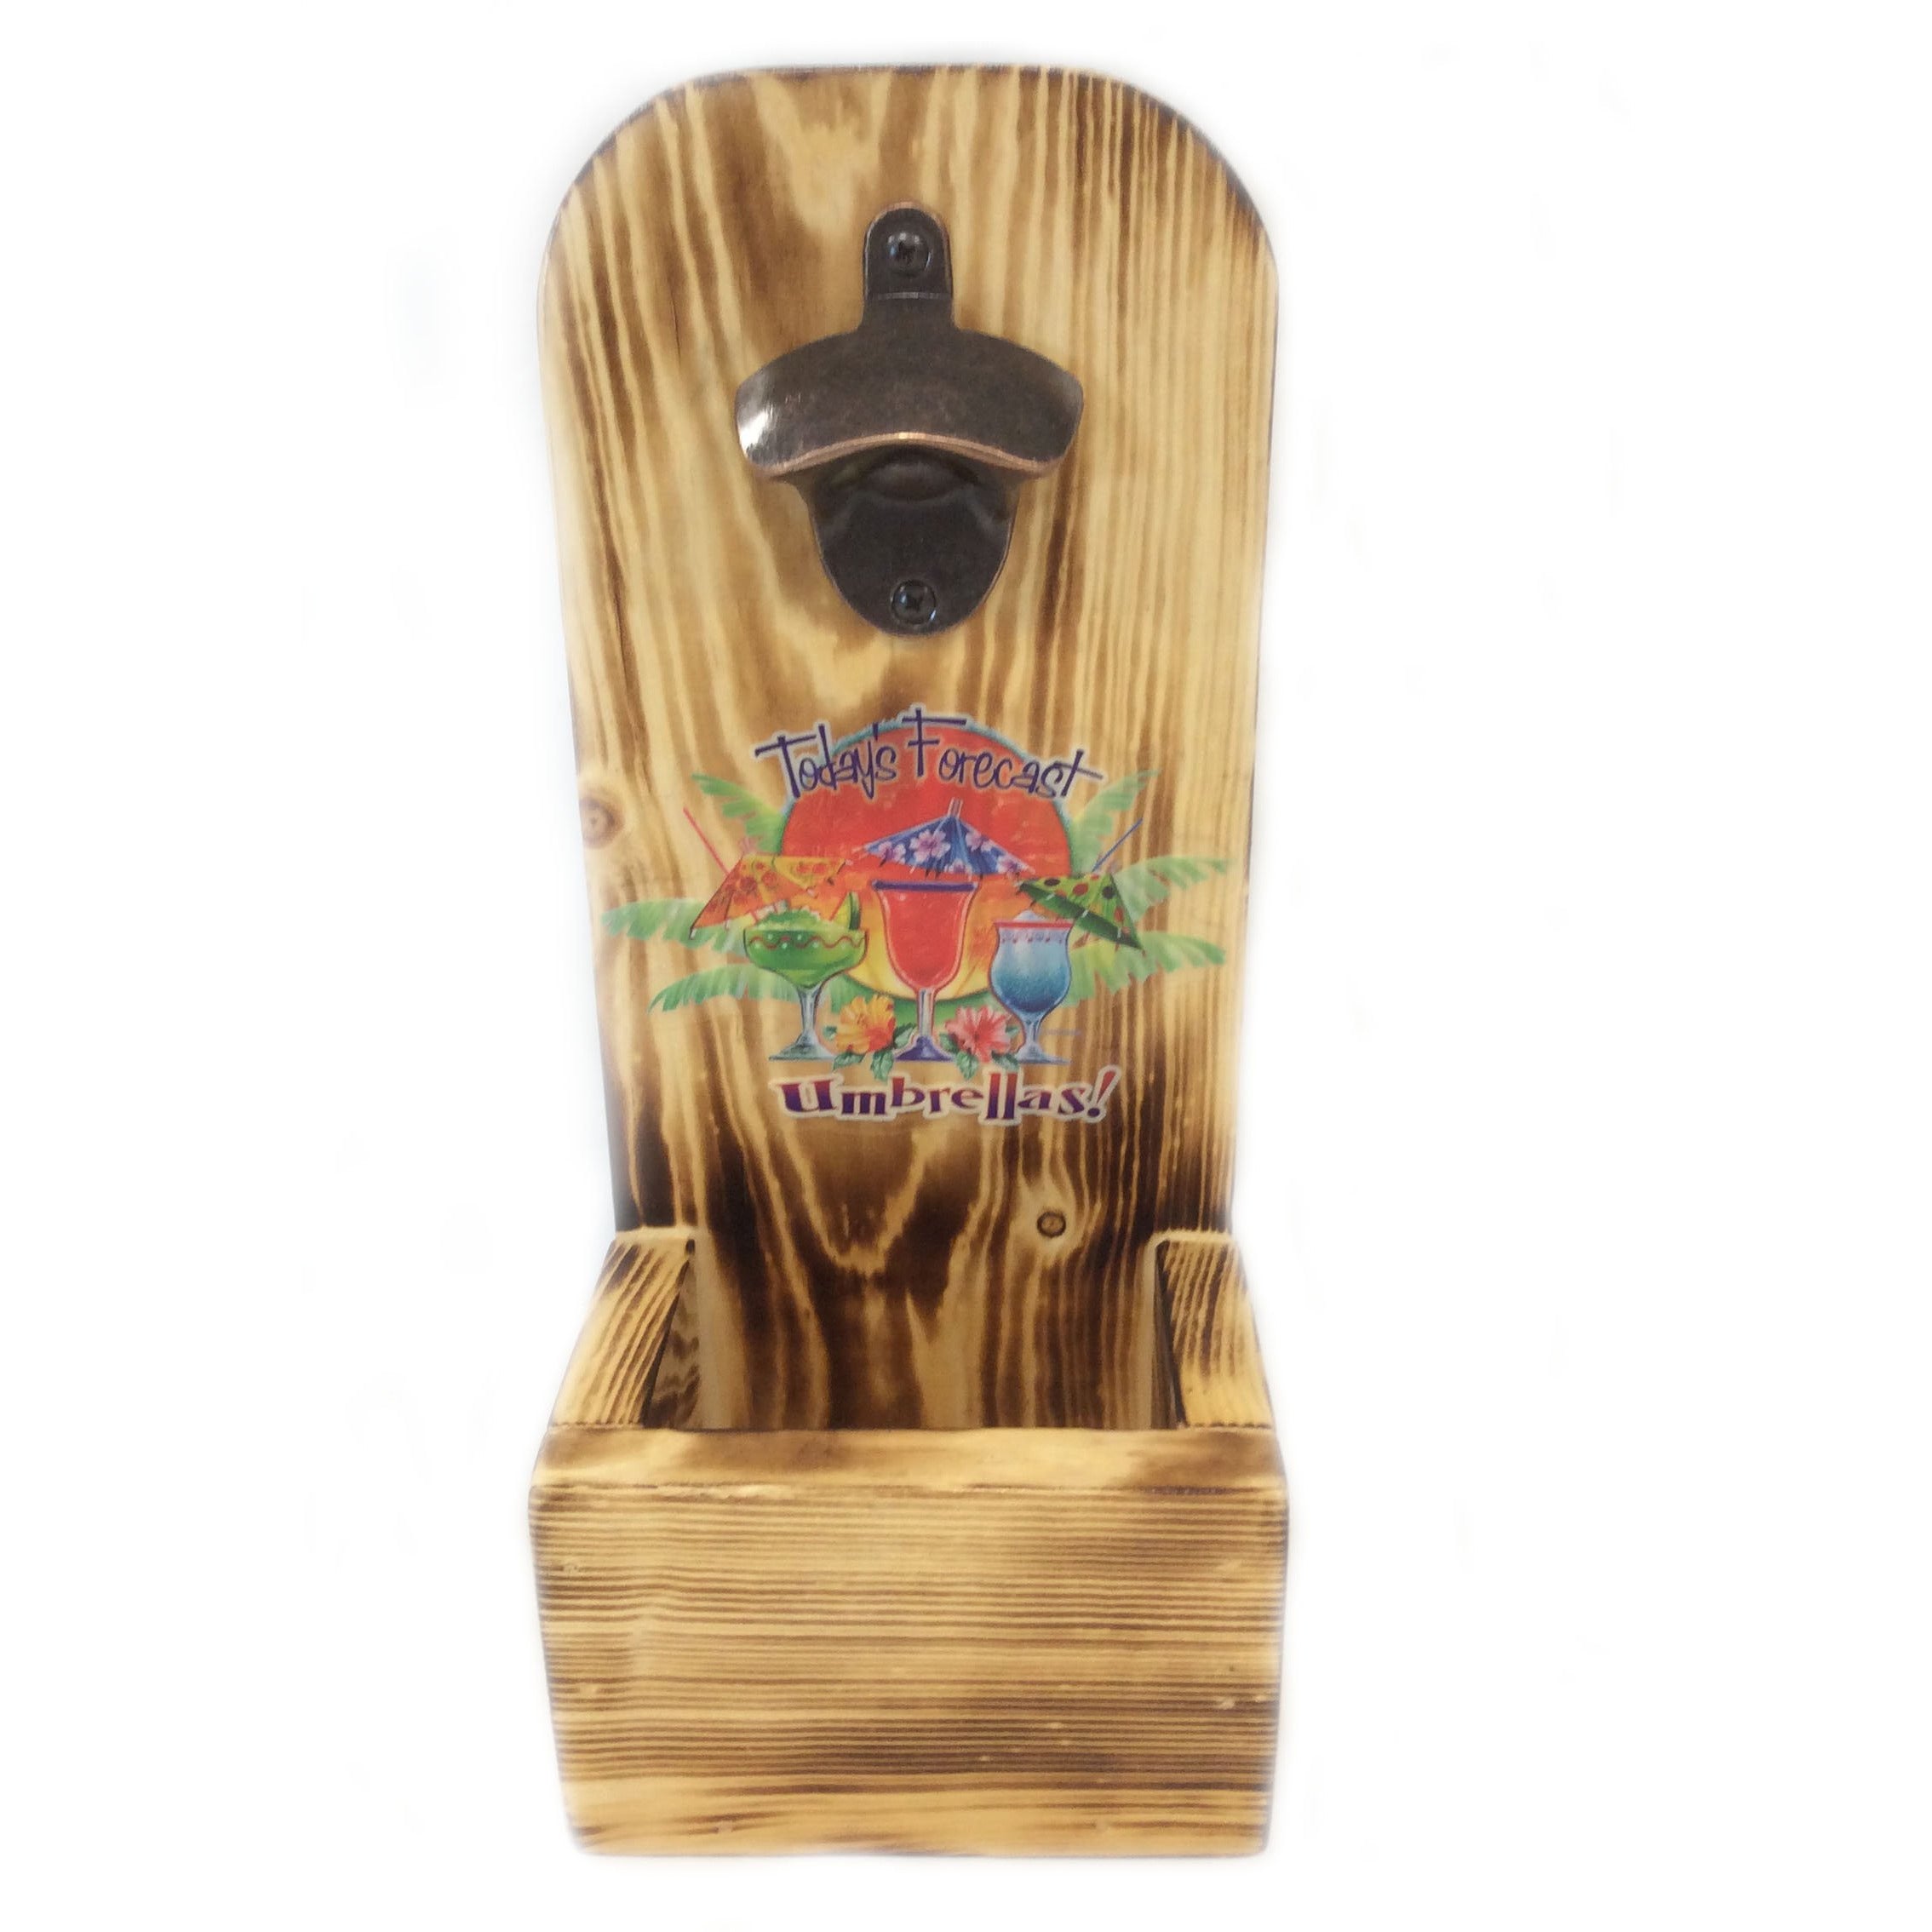 Wall Mounted Wooden Bottle Opener Tropical Forcast